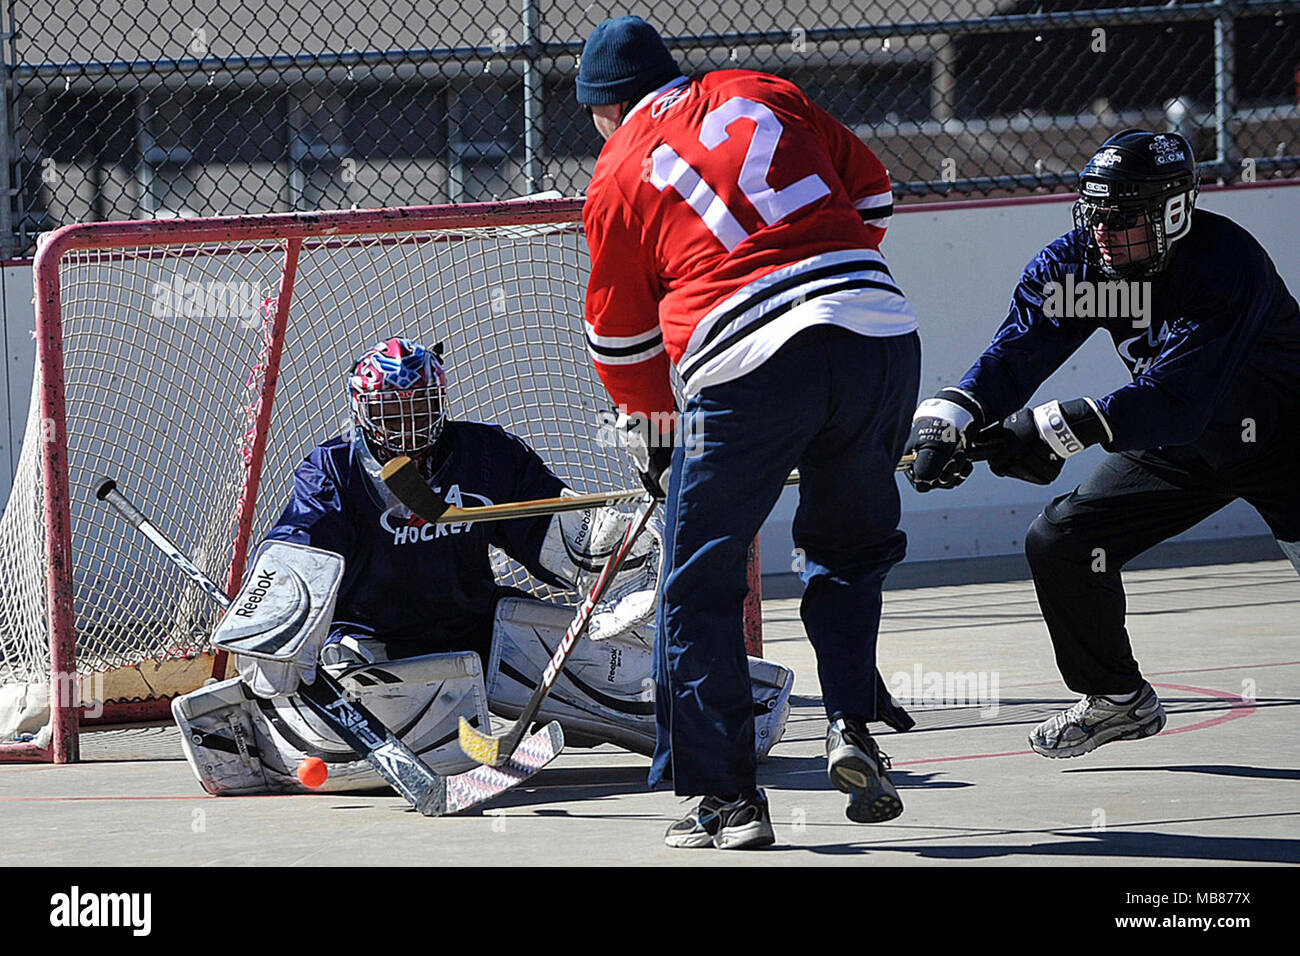 Team USA goalie makes a save against Team Canada during the USA Jr Airman vs Canada Jr. Airmen Ball Hockey Tournament at the Peterson Roller Hockey Rink at Peterson AFB February 21, 2014. Canada won the game 6-0. Stock Photo